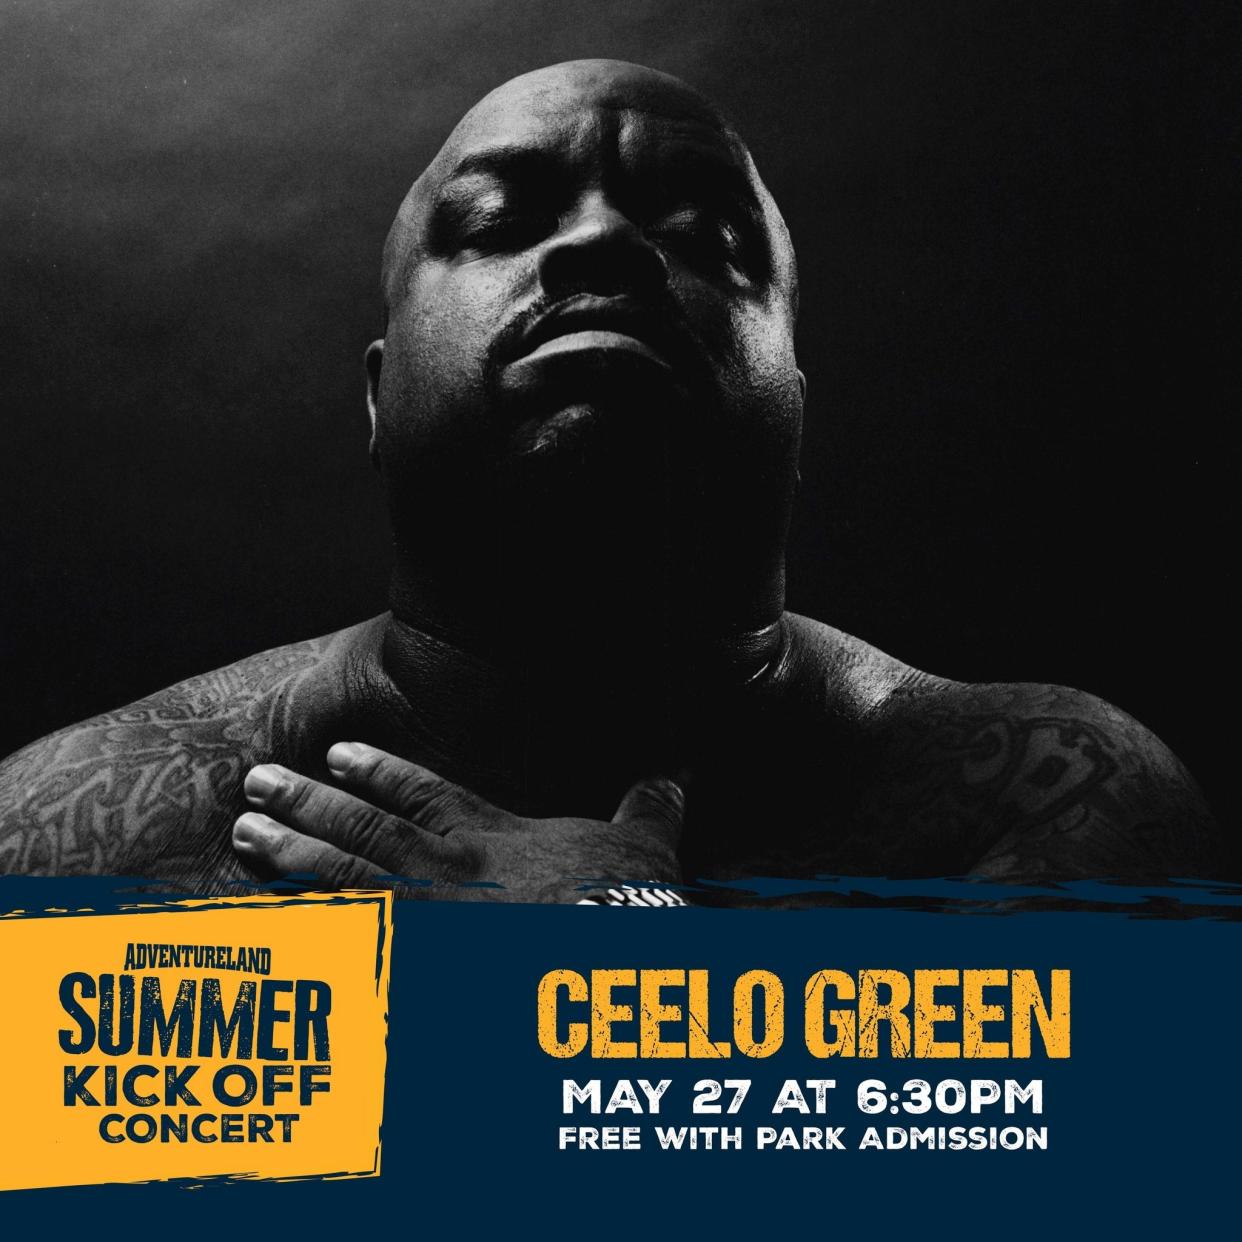 CeeLo Green helps the Des Moines metro kick off summer with a free concert at Adventureland.